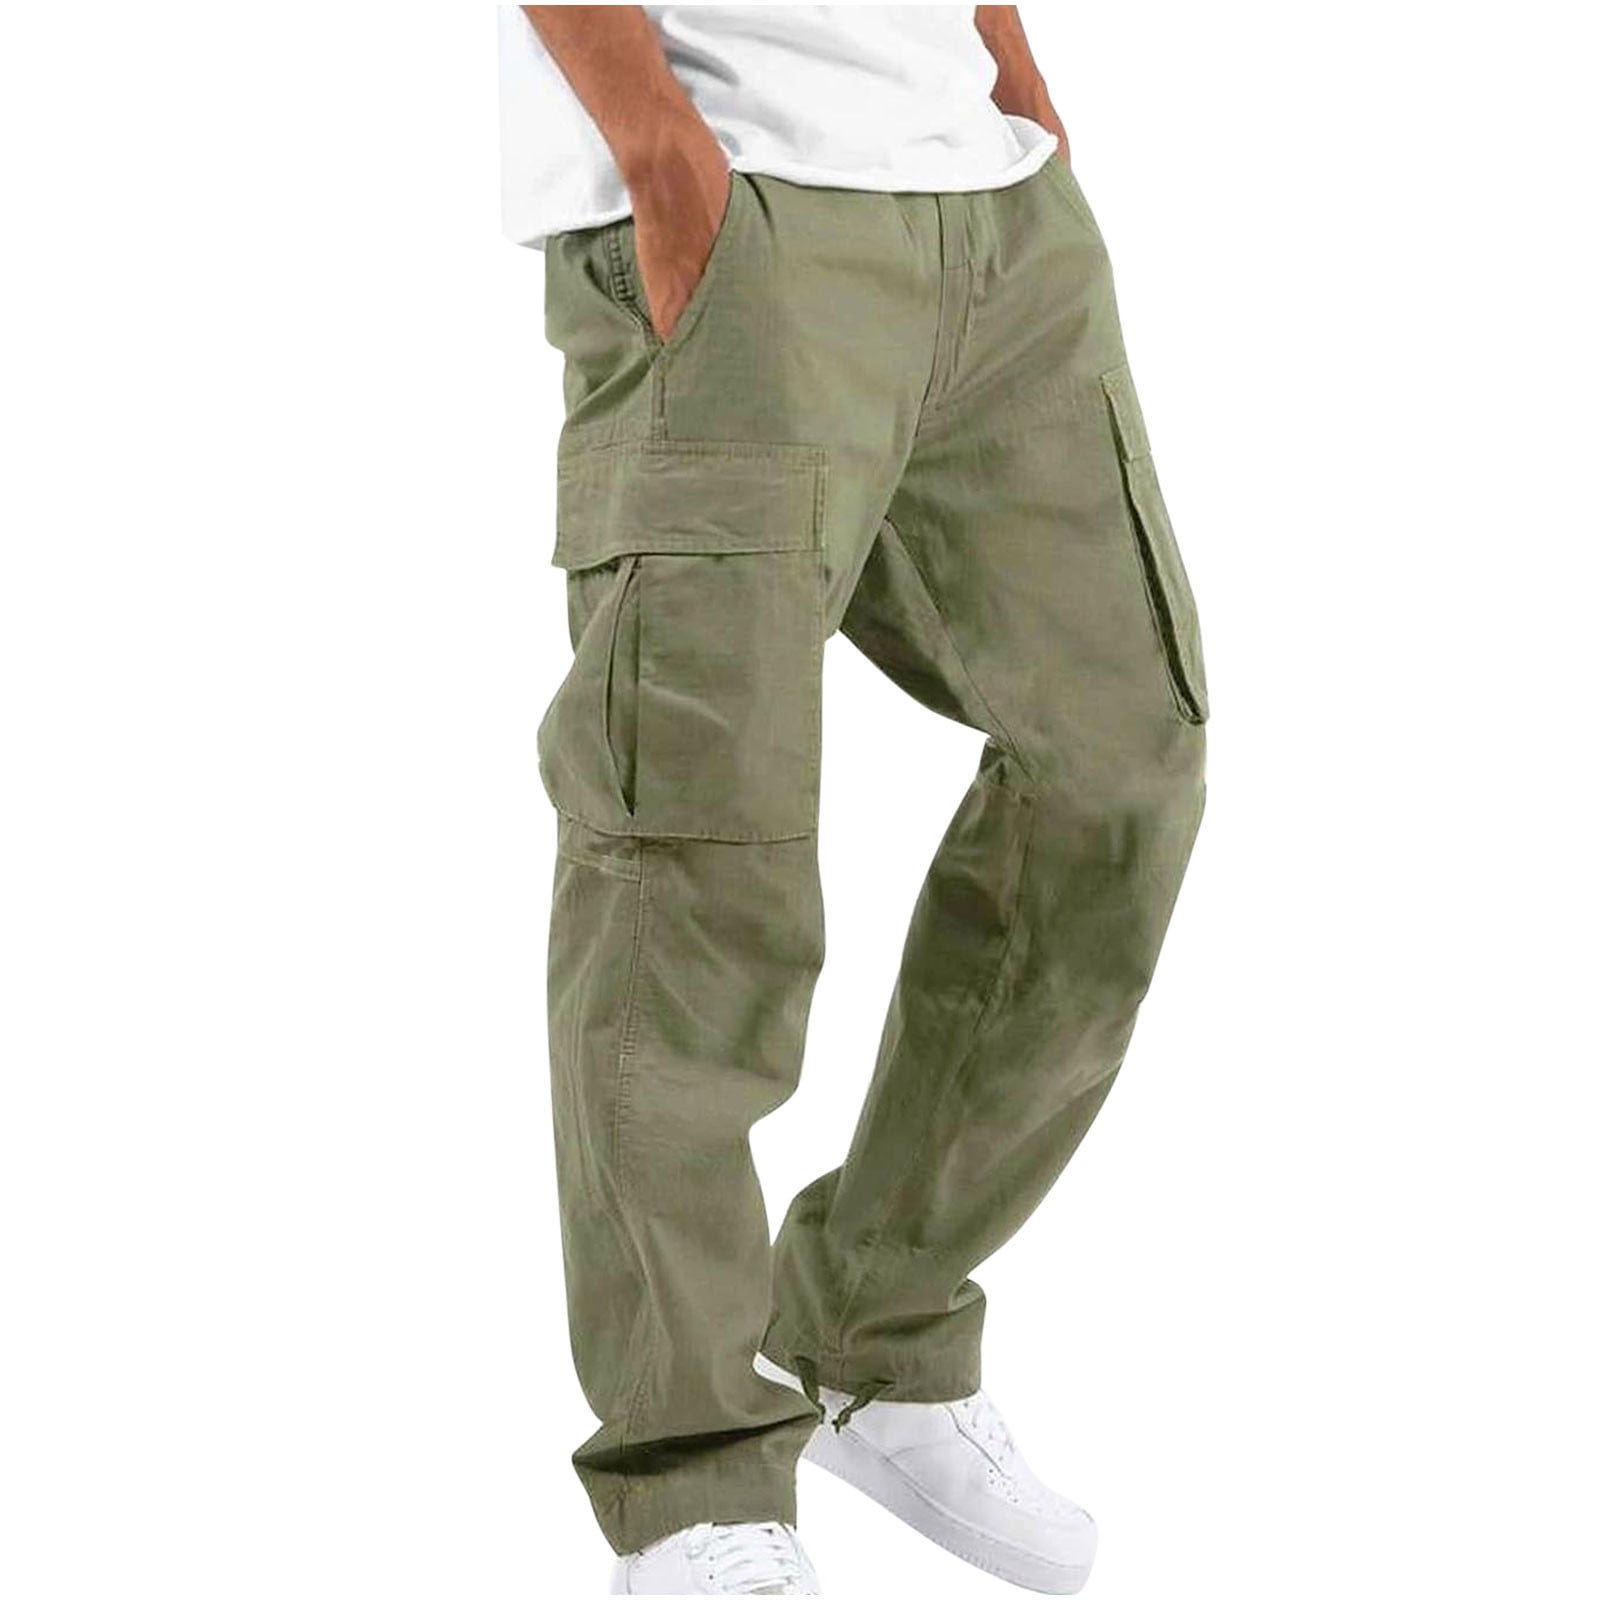 Buy SKECHERS Solid Polyester Regular Fit Men's Casual Trousers